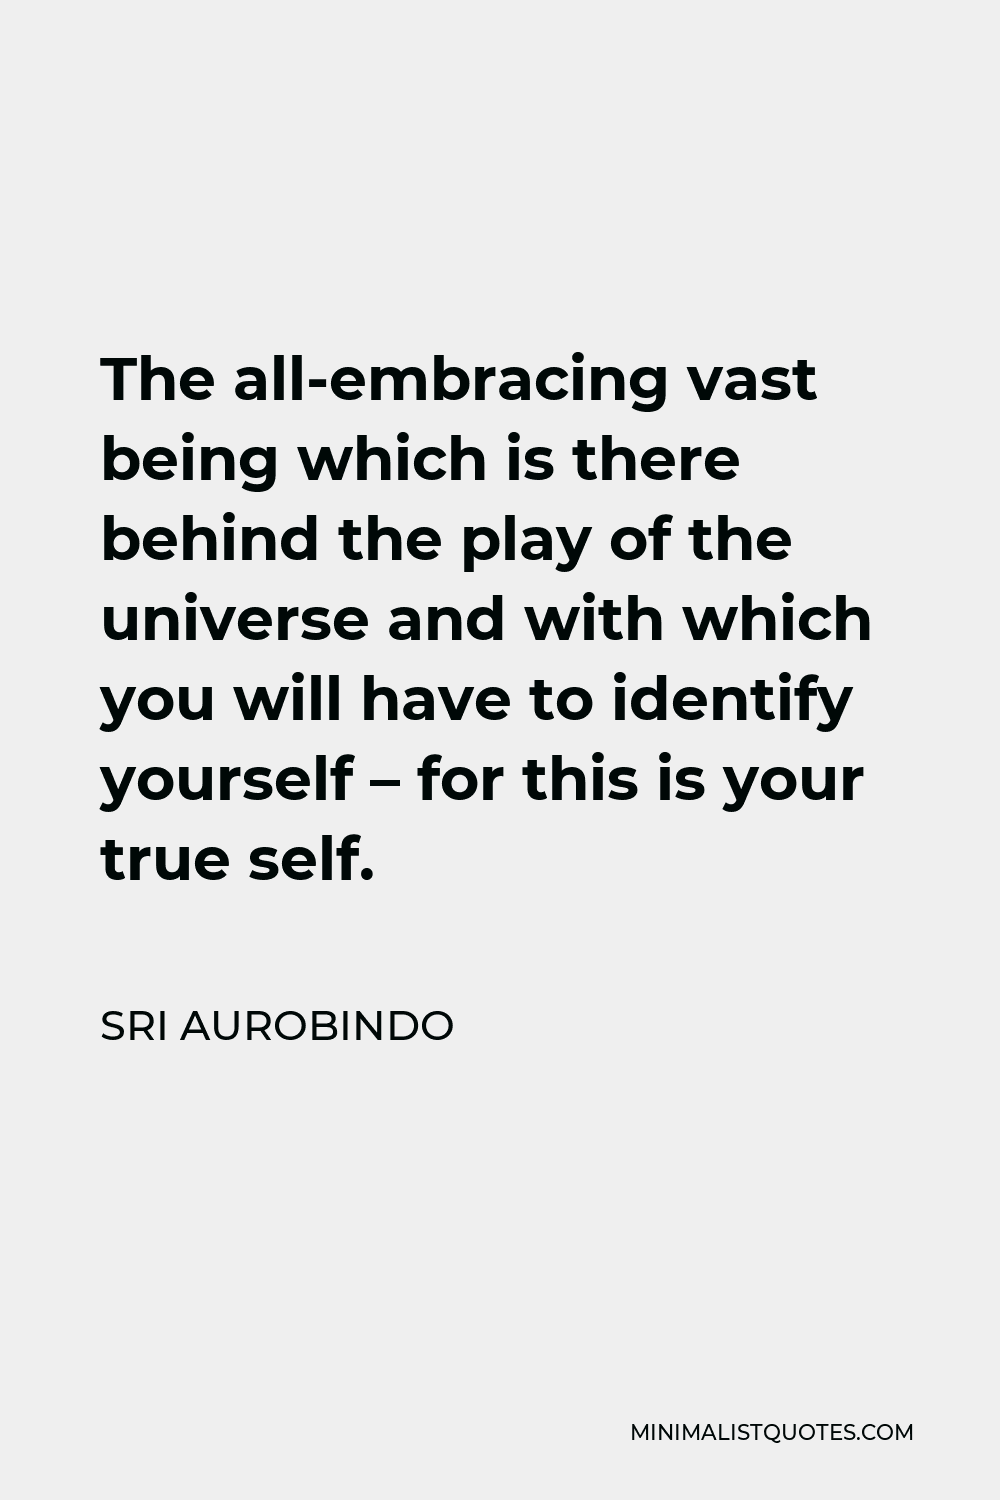 Sri Aurobindo Quote - The all-embracing vast being which is there behind the play of the universe and with which you will have to identify yourself – for this is your true self.